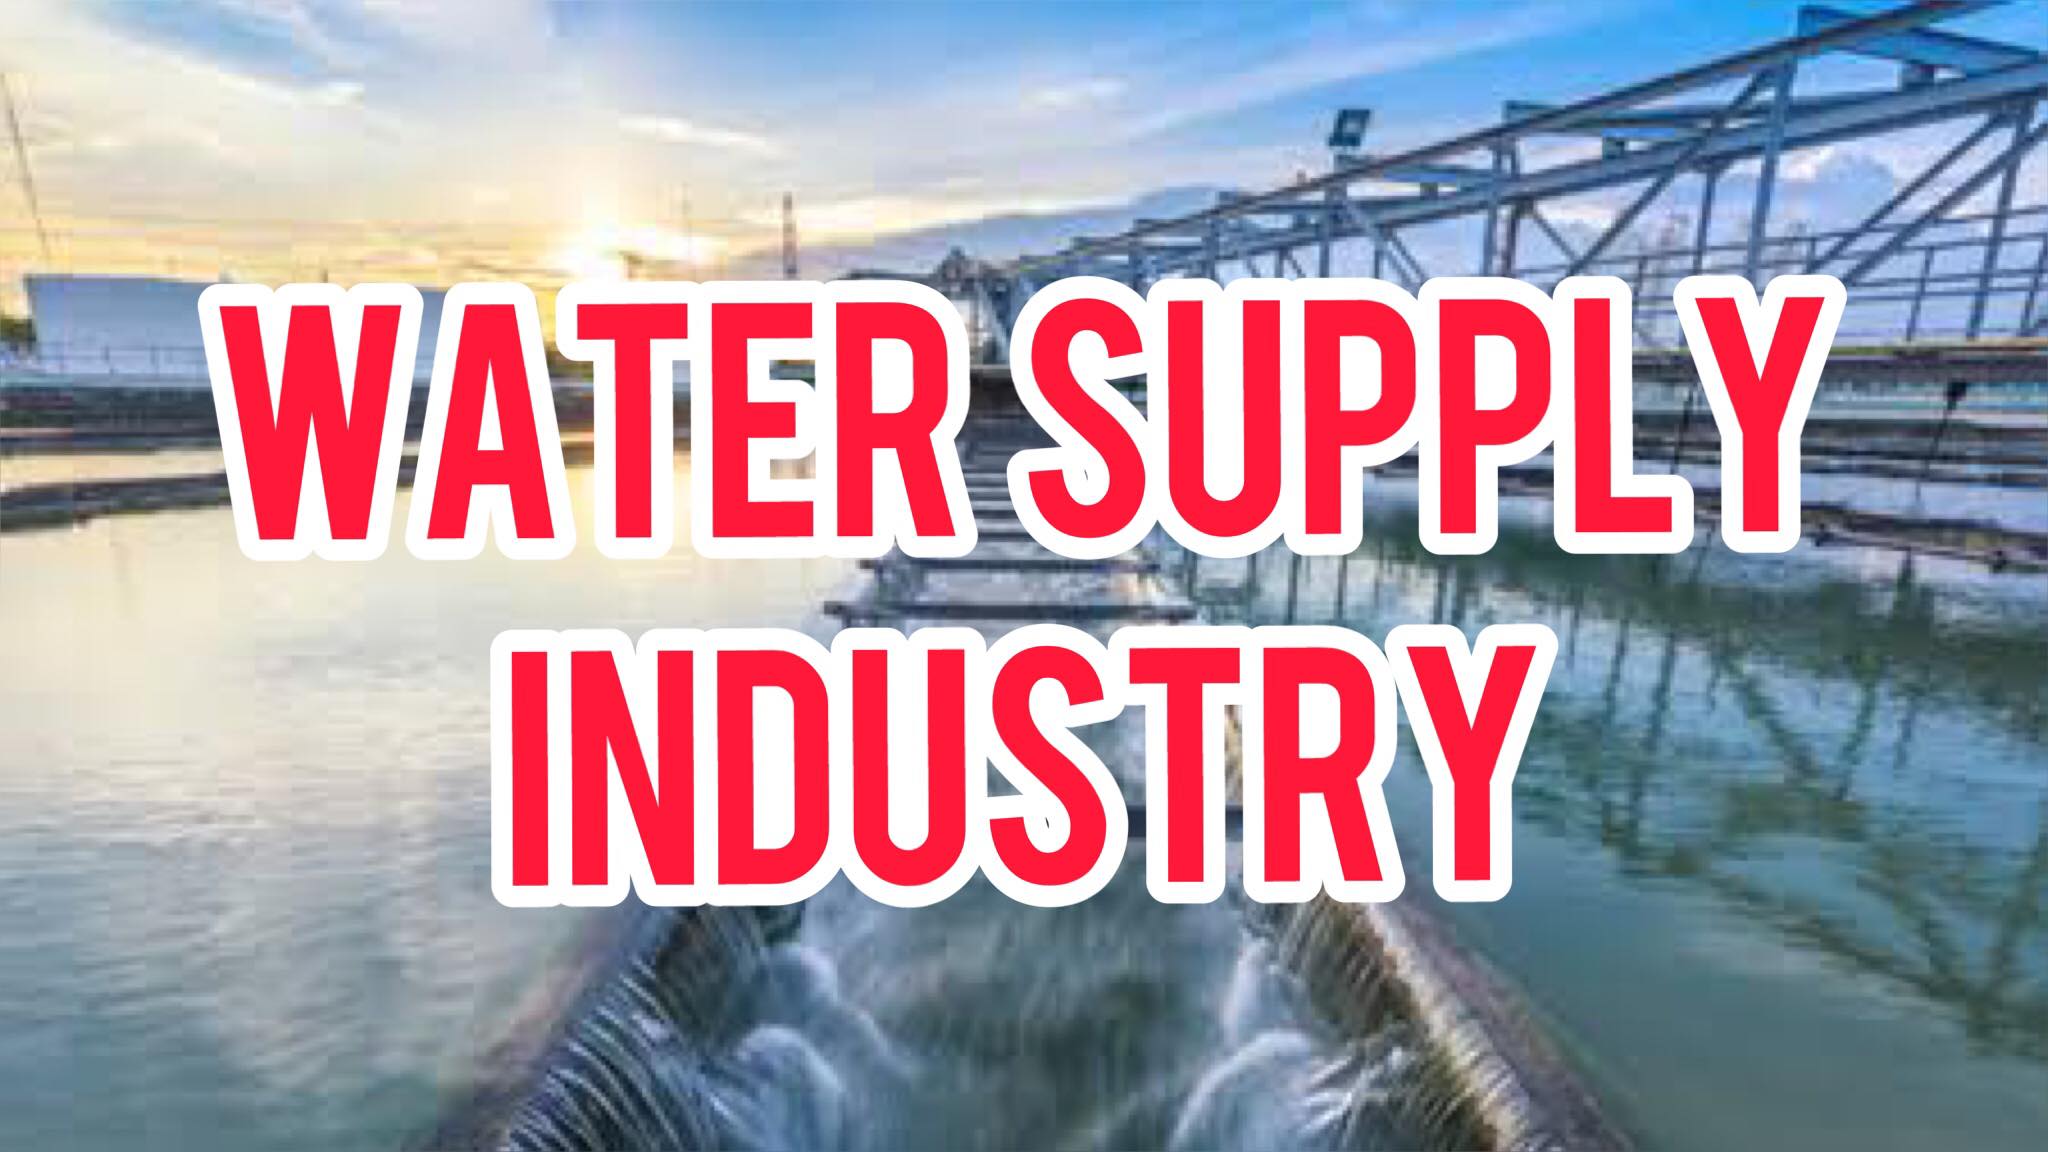 How Many Jobs Are Available In Water Supply